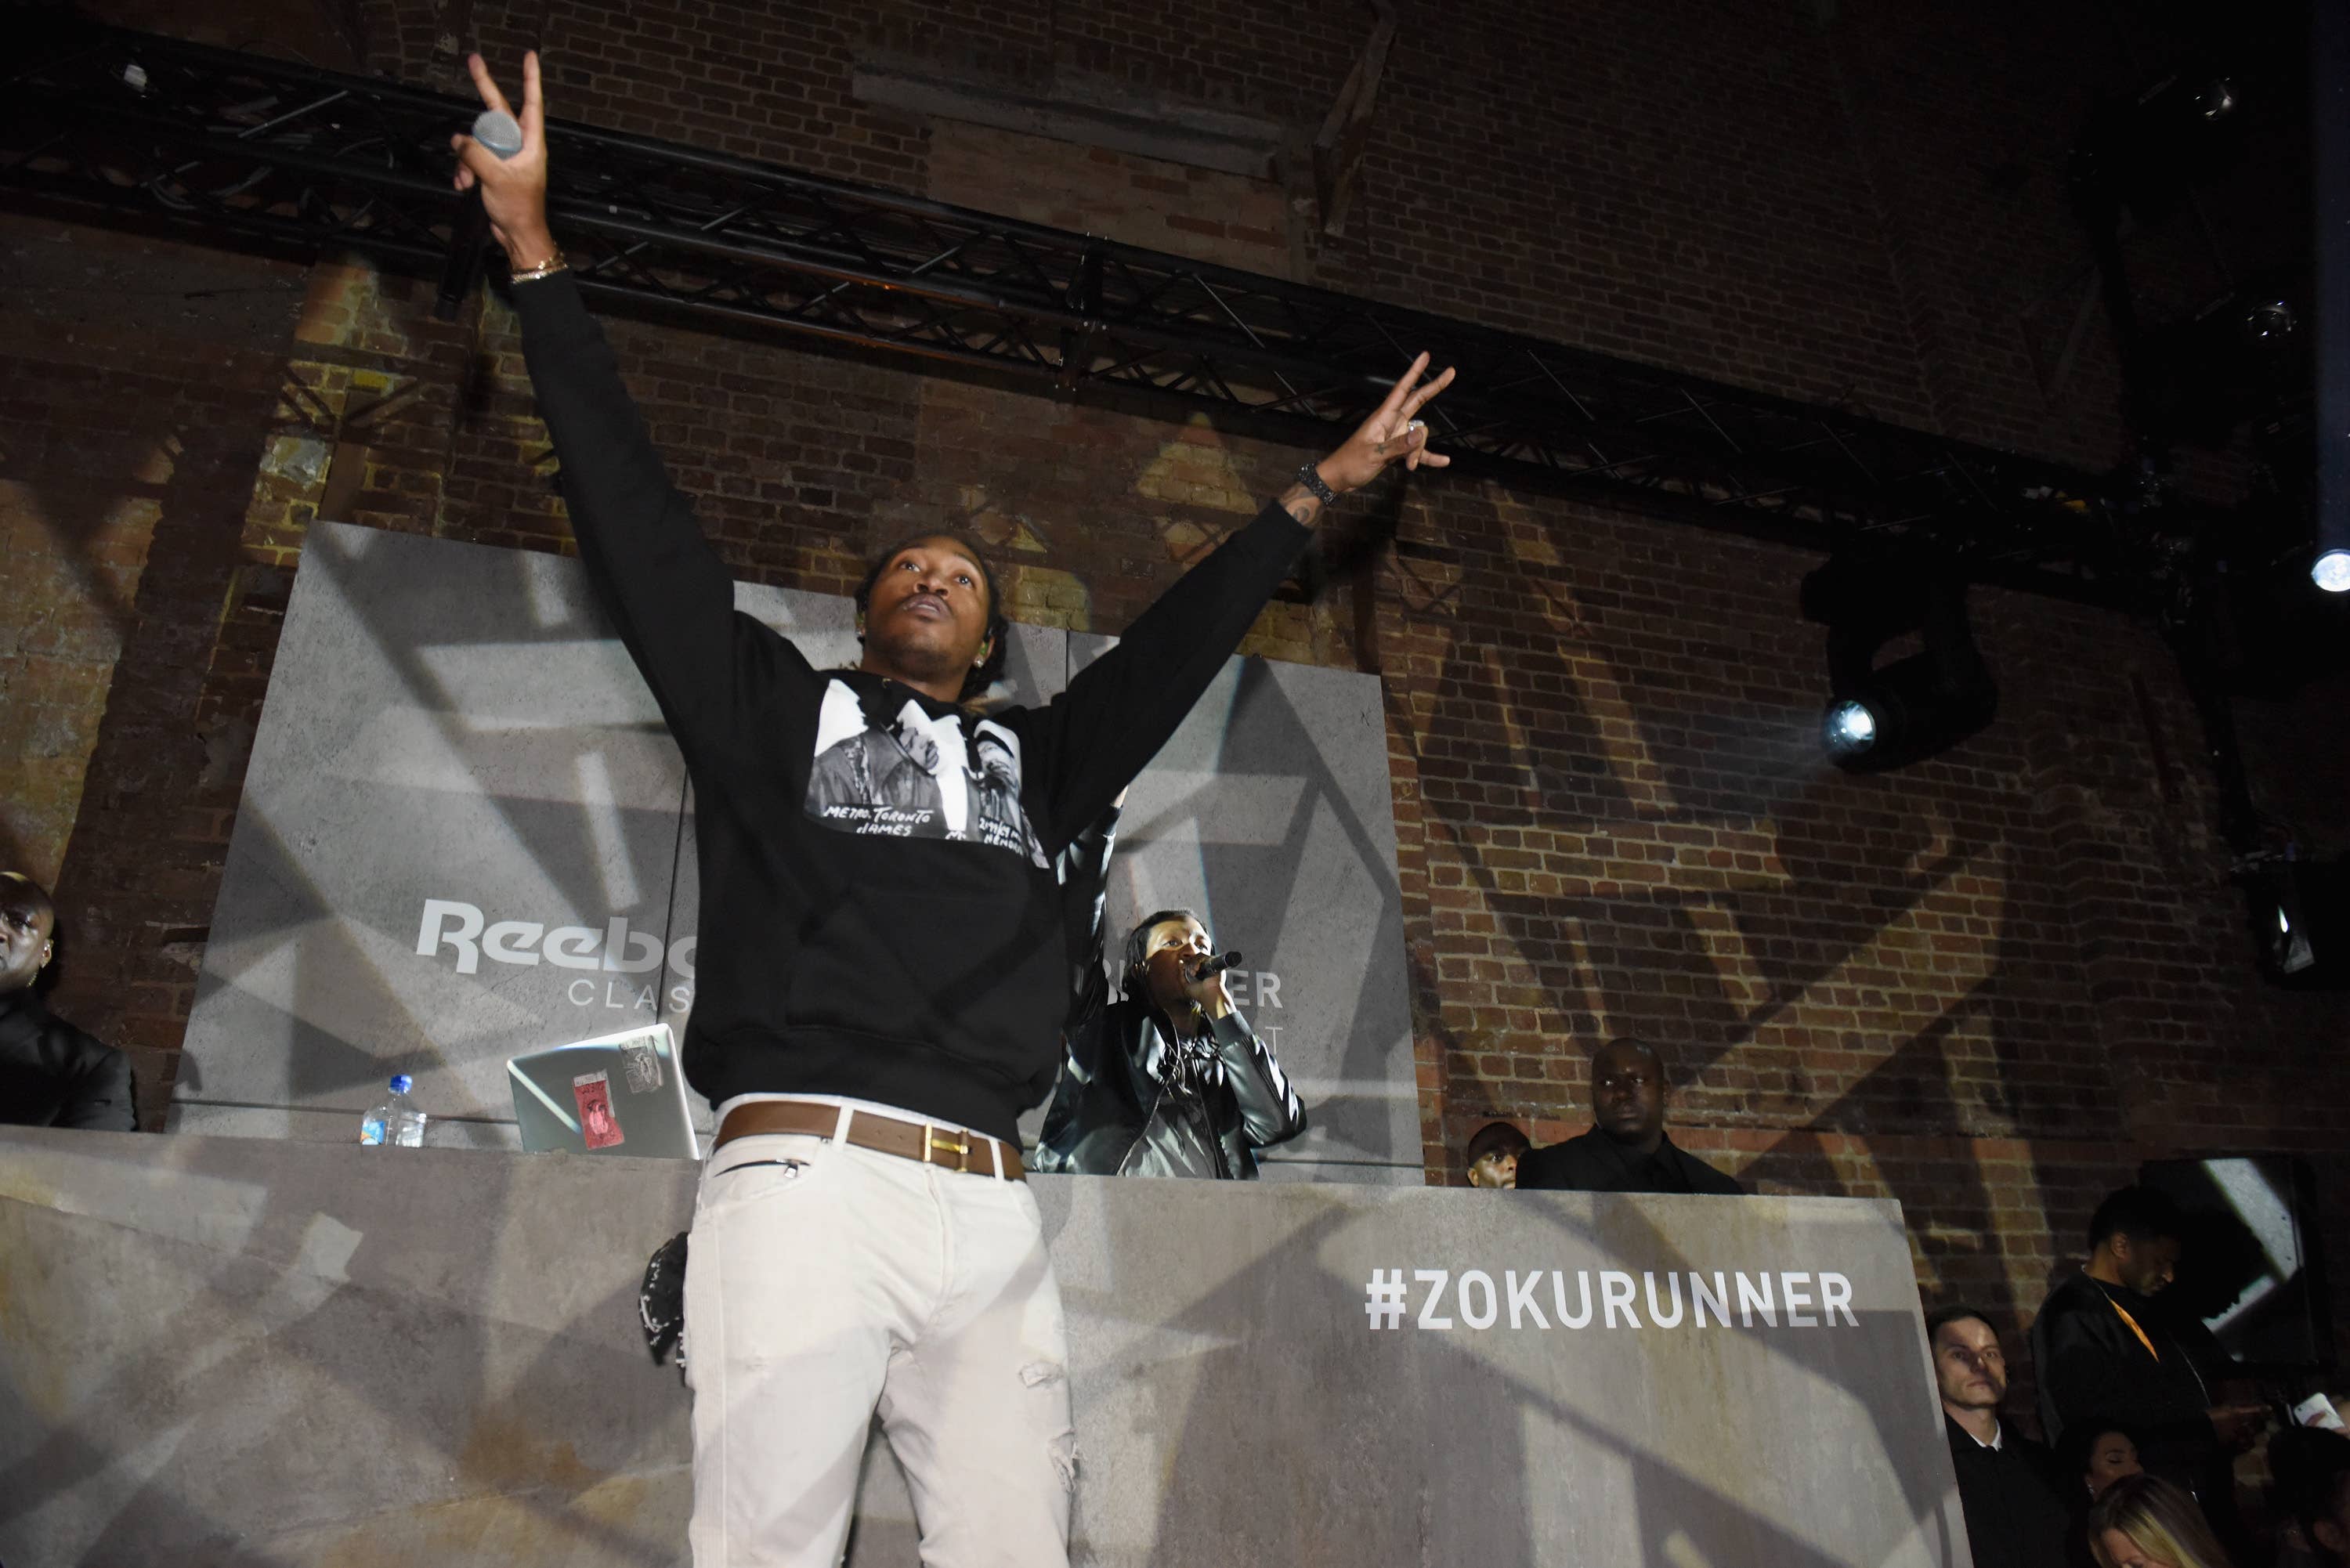 Future performing at Reebok's ZOKU Runner launch party in London.